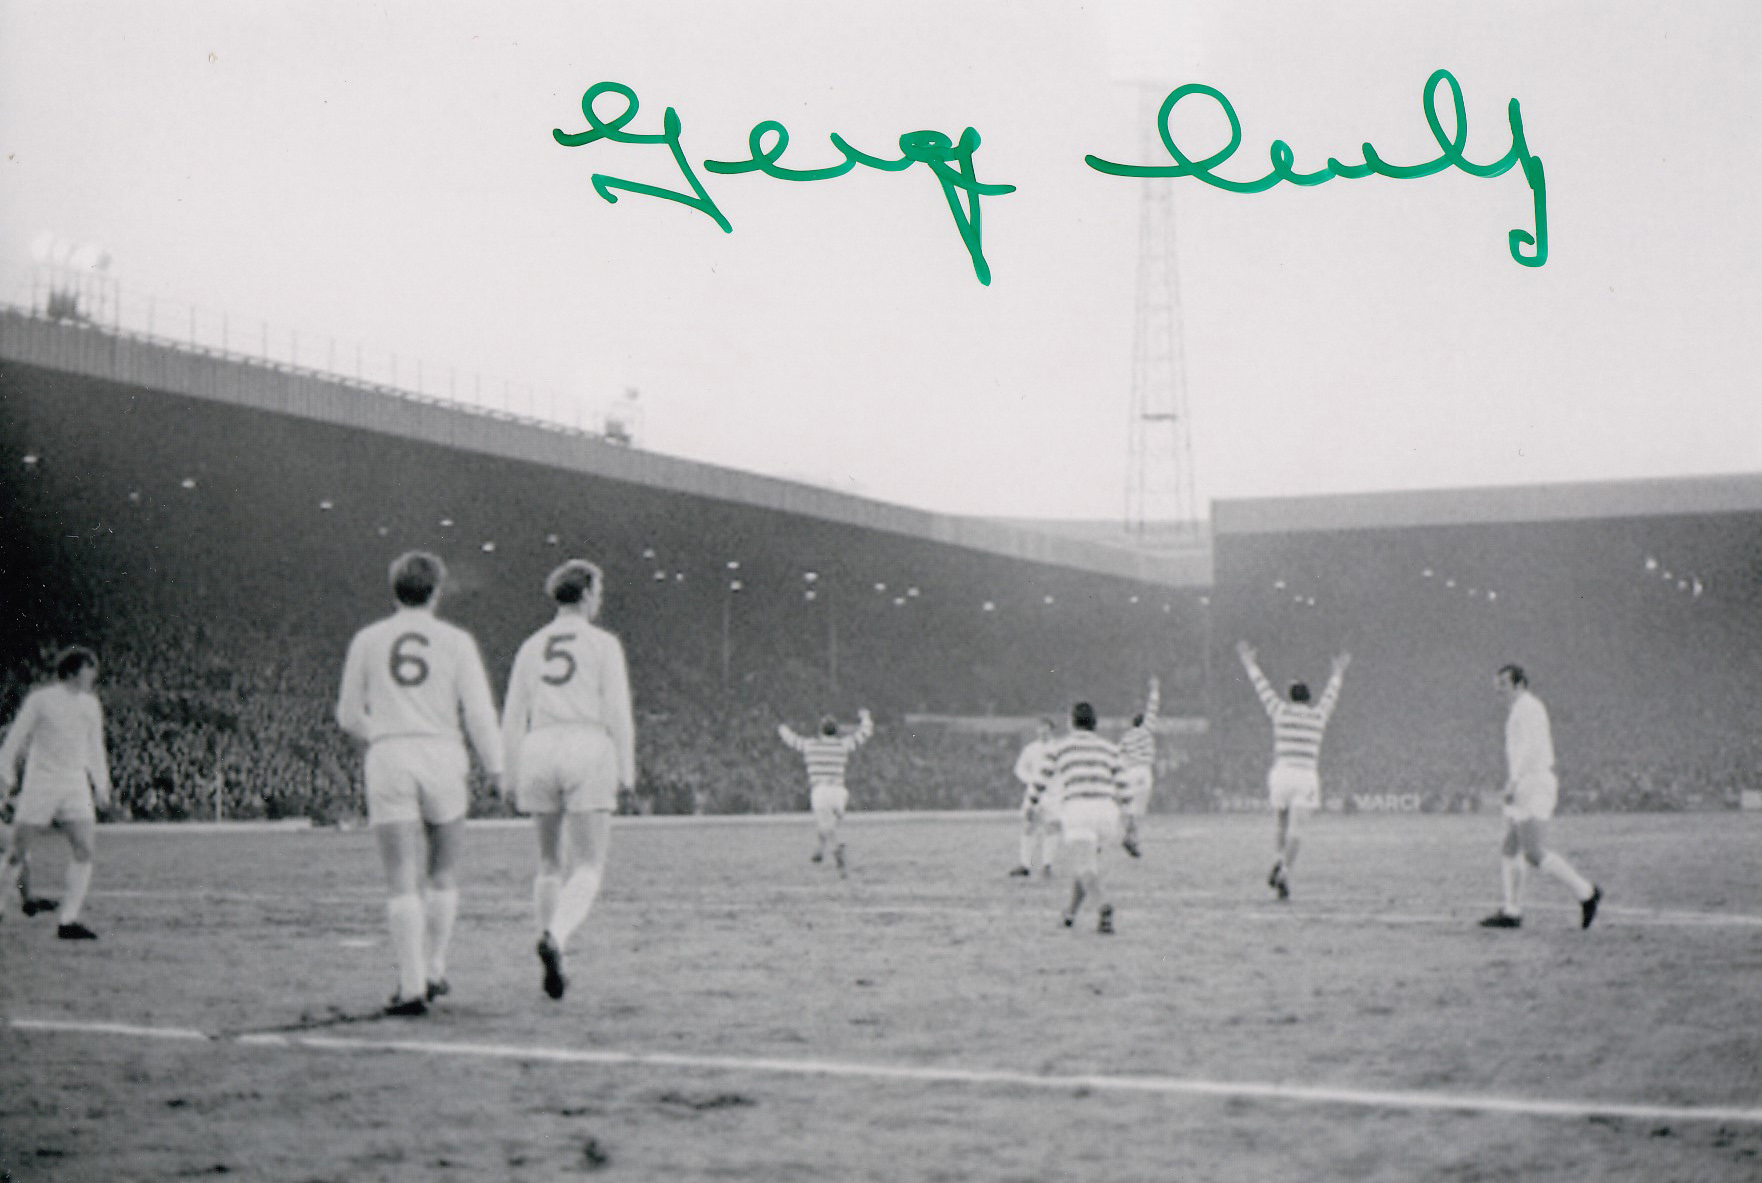 GEORGE CONNELLY 1970: Autographed 6 x 4 photo, depicting GEORGE CONNELLY running away in celebration